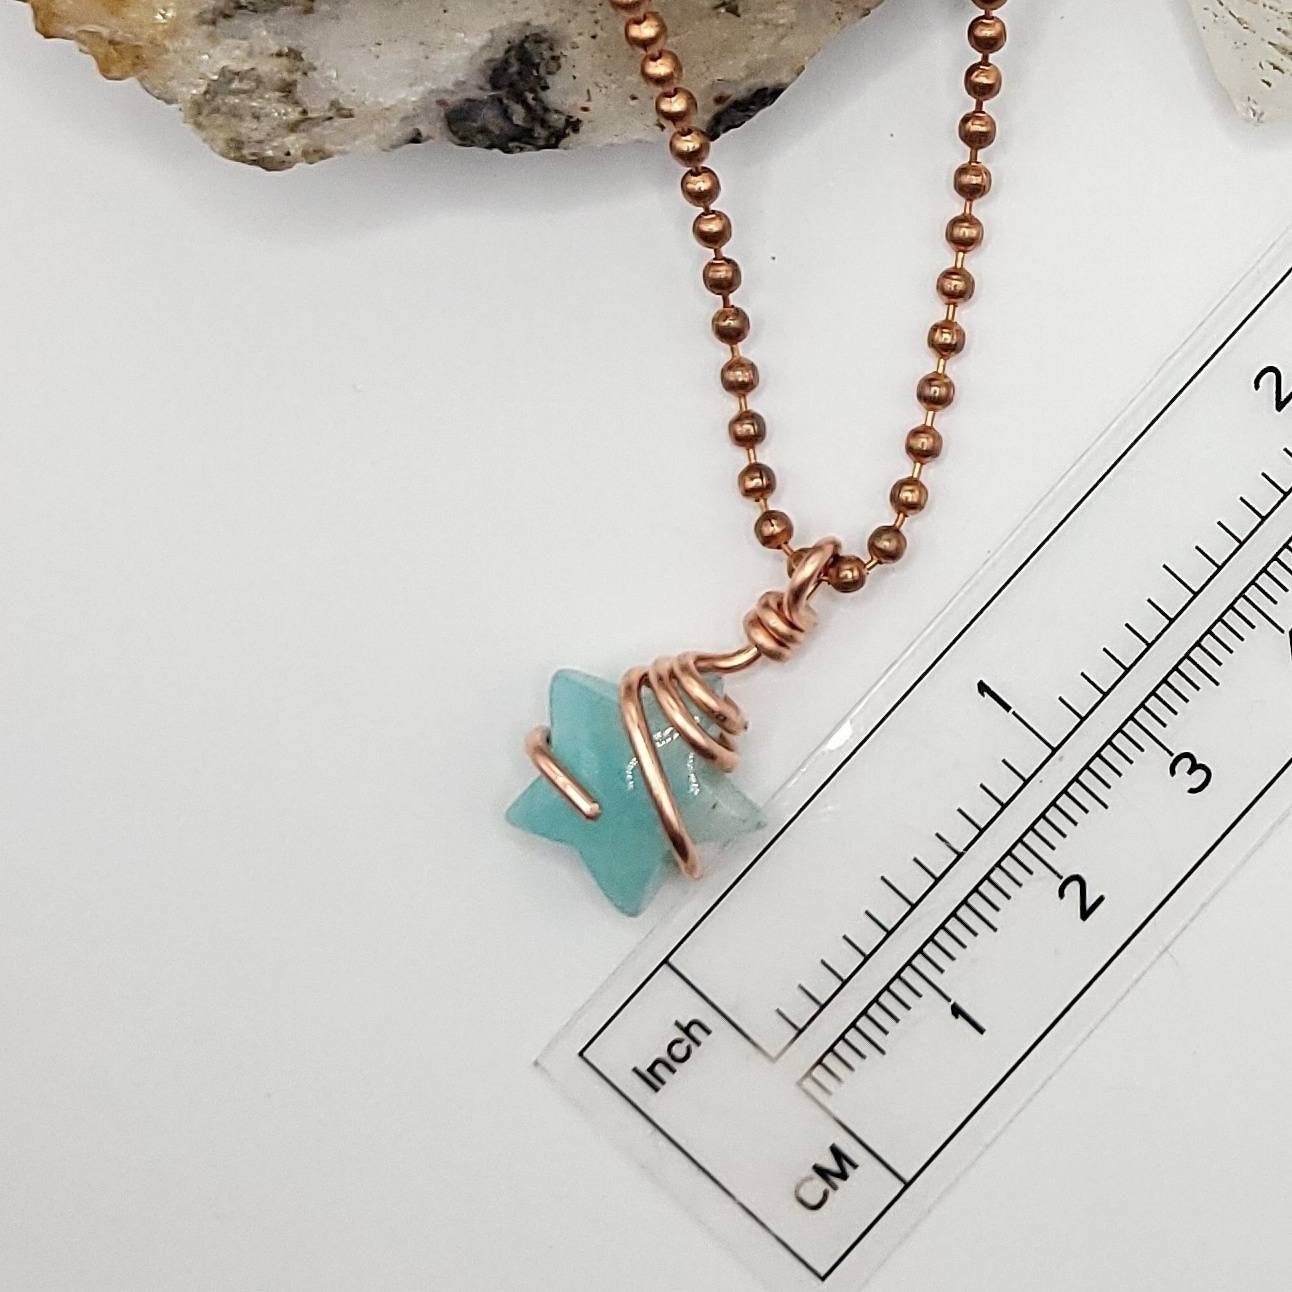 Amazonite Star Necklace, Copper Wire Wrapped Amazonite Pendant, Crystal Star Pendant